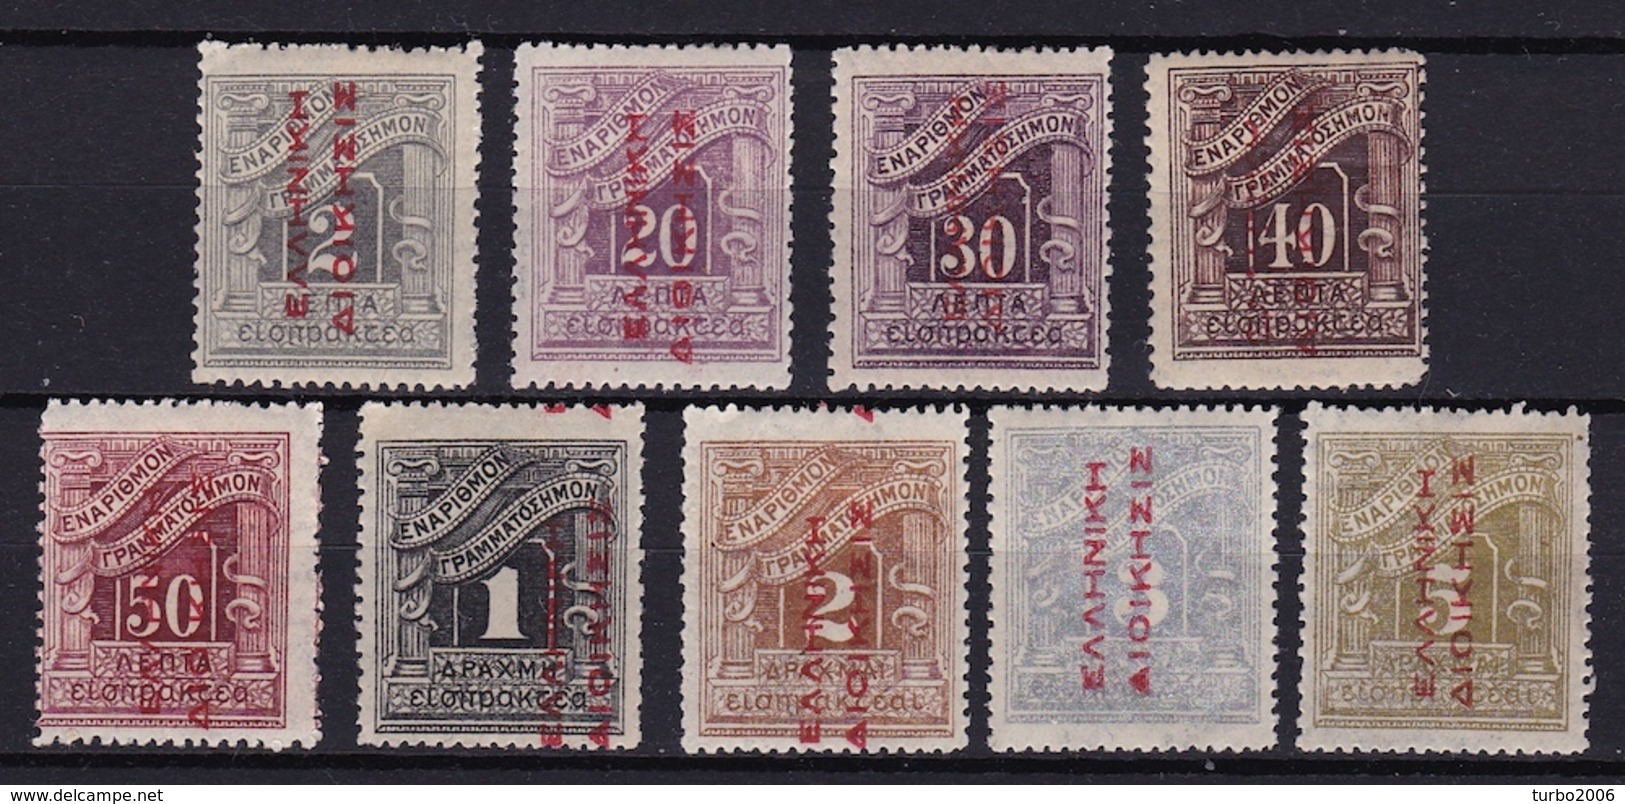 GREECE 1912 Postage Due With Red Overprint ELLHNIKH DIOIKSIS 9 Values From The Set To 5 Dr. Vl. D 55 - 58 / 65 MH - Ongebruikt